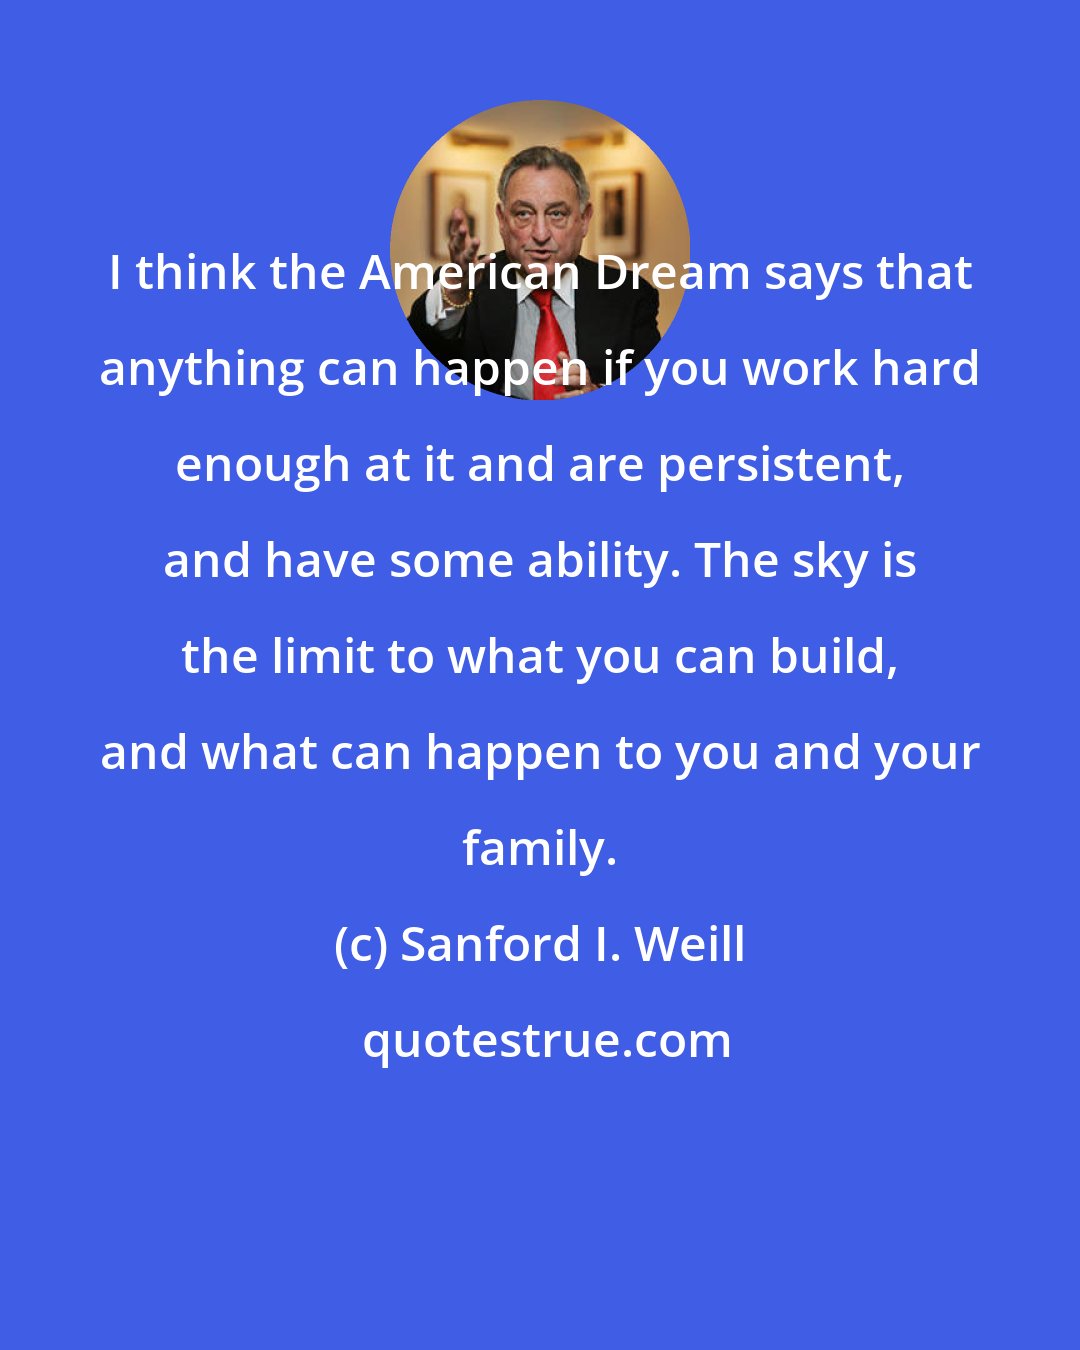 Sanford I. Weill: I think the American Dream says that anything can happen if you work hard enough at it and are persistent, and have some ability. The sky is the limit to what you can build, and what can happen to you and your family.